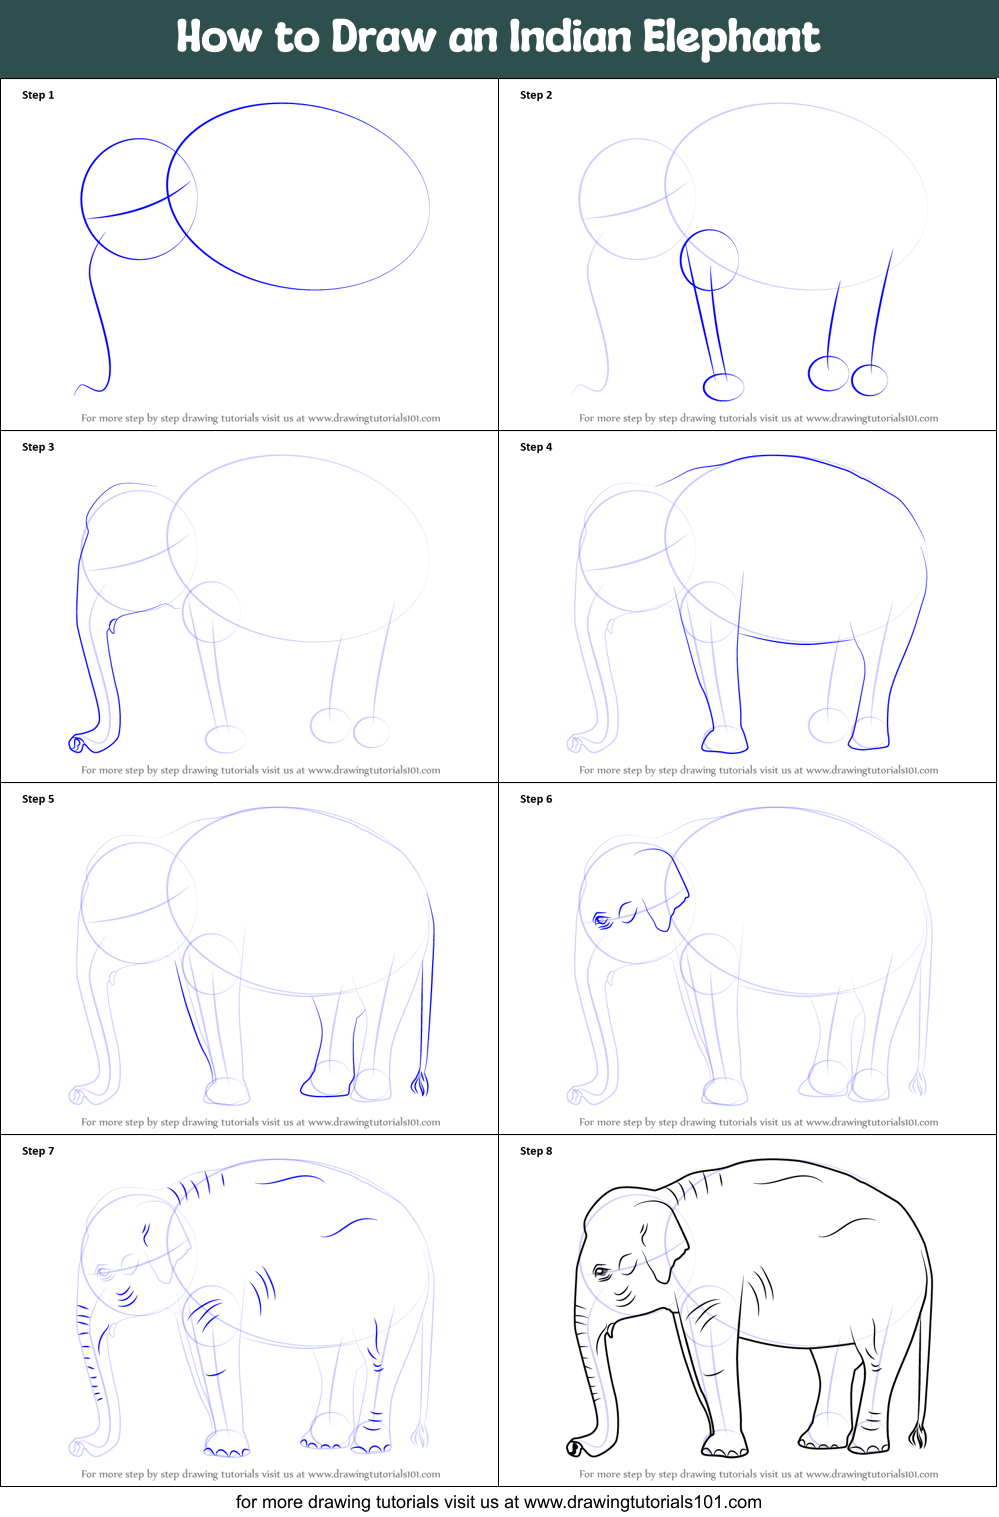 How to Draw an Indian Elephant printable step by step drawing sheet